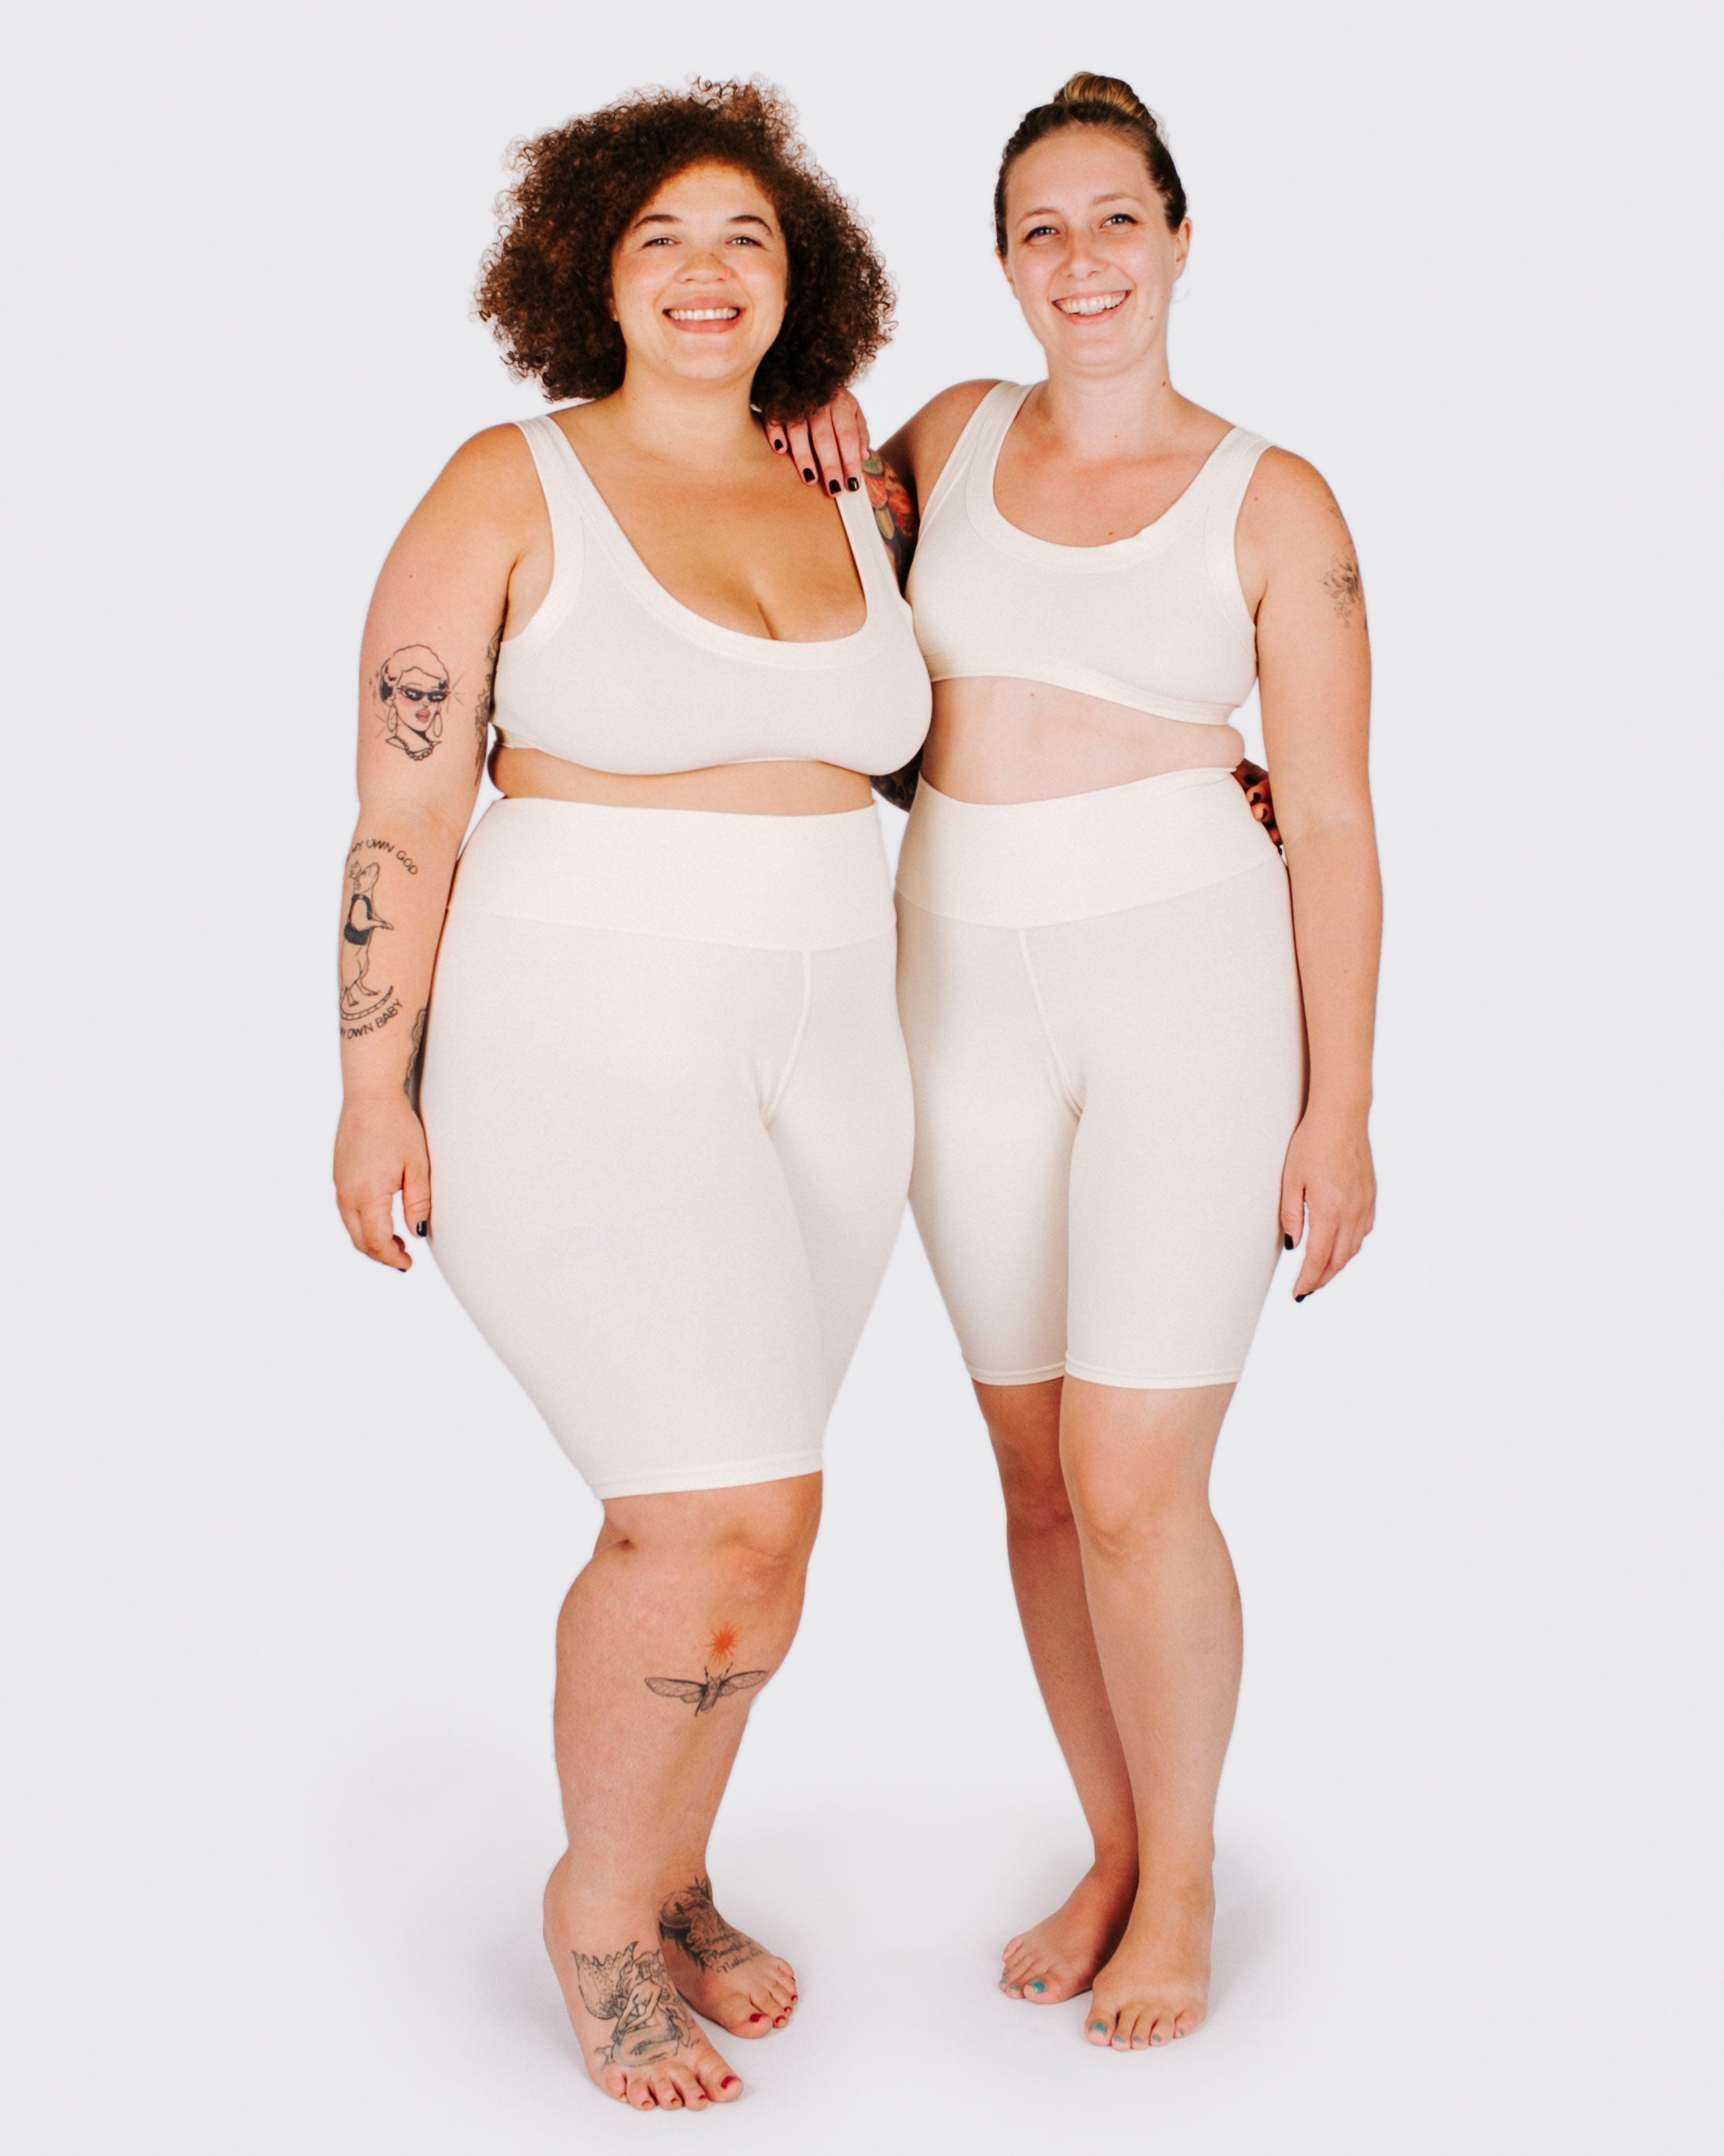 Fit photo from the front of Thunderpants organic cotton Bike Shorts and Bralettes in off-white on two models standing together.